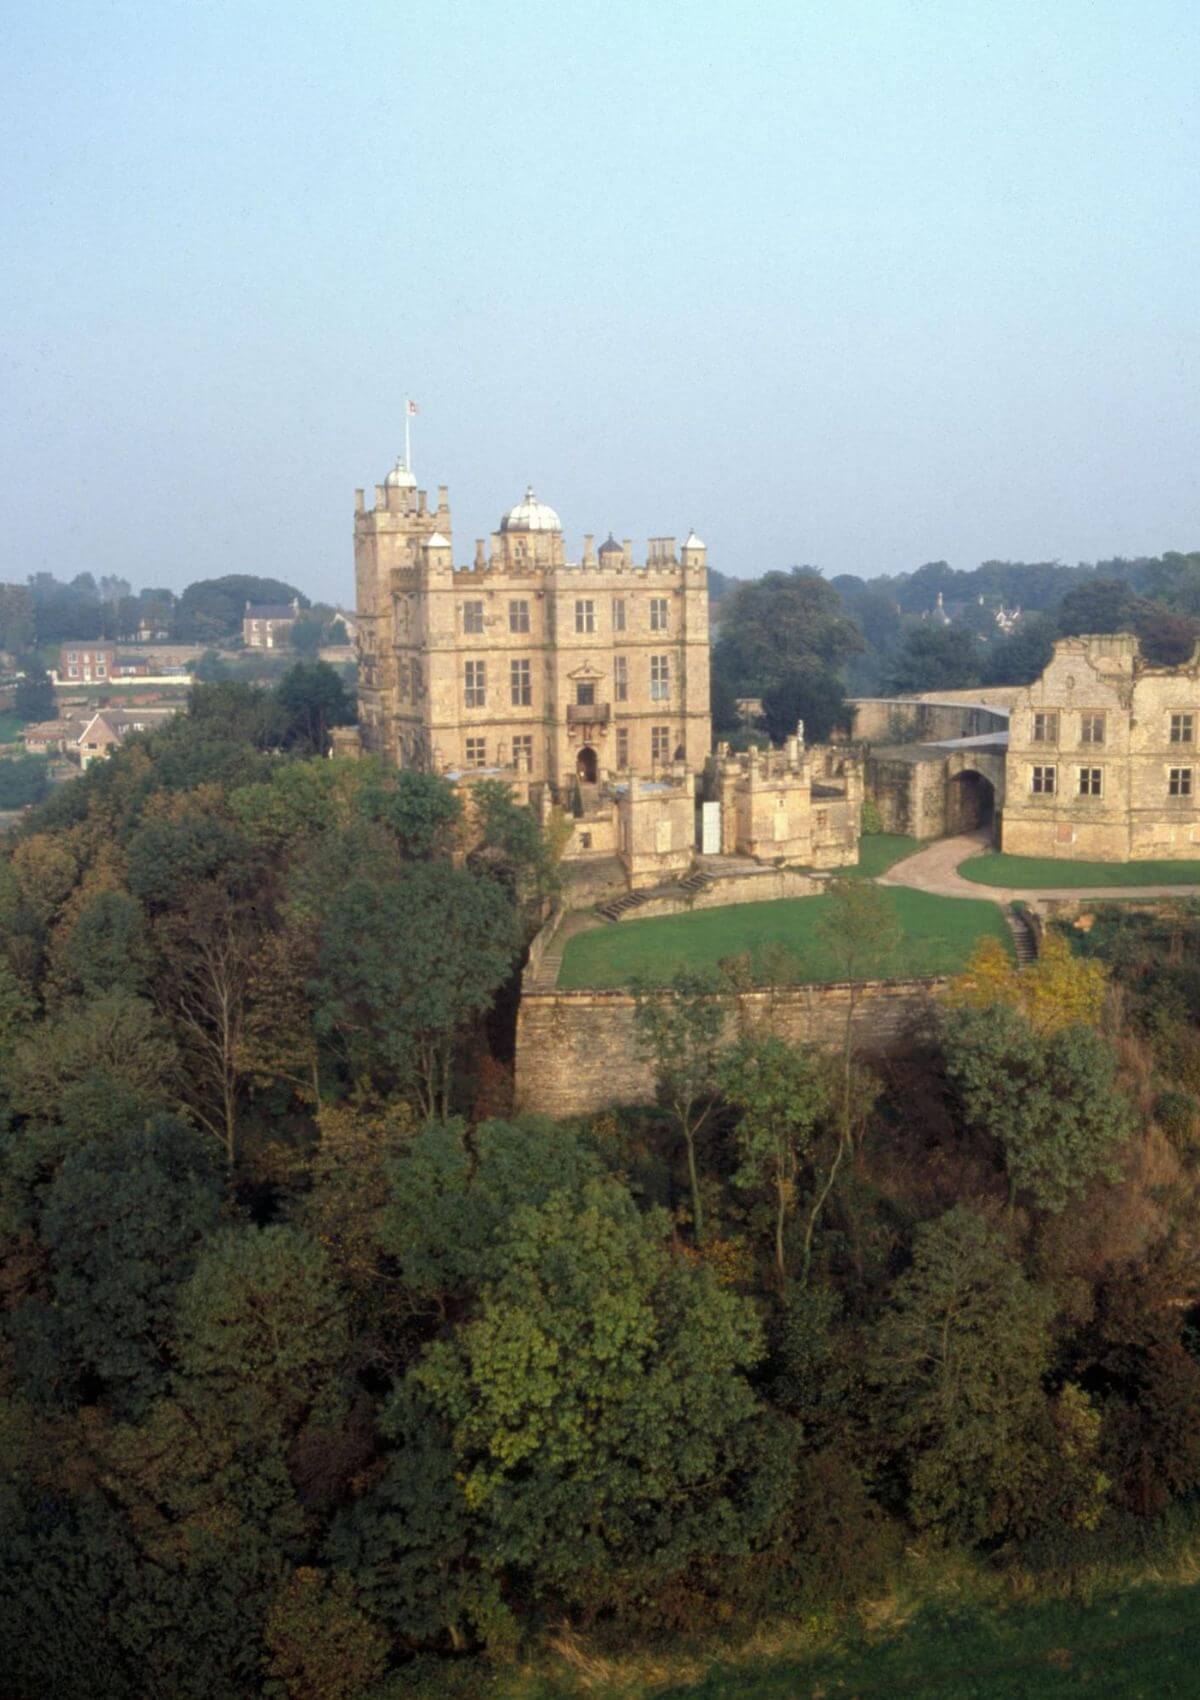 Day trip from Nottingham to Bolsover Castle